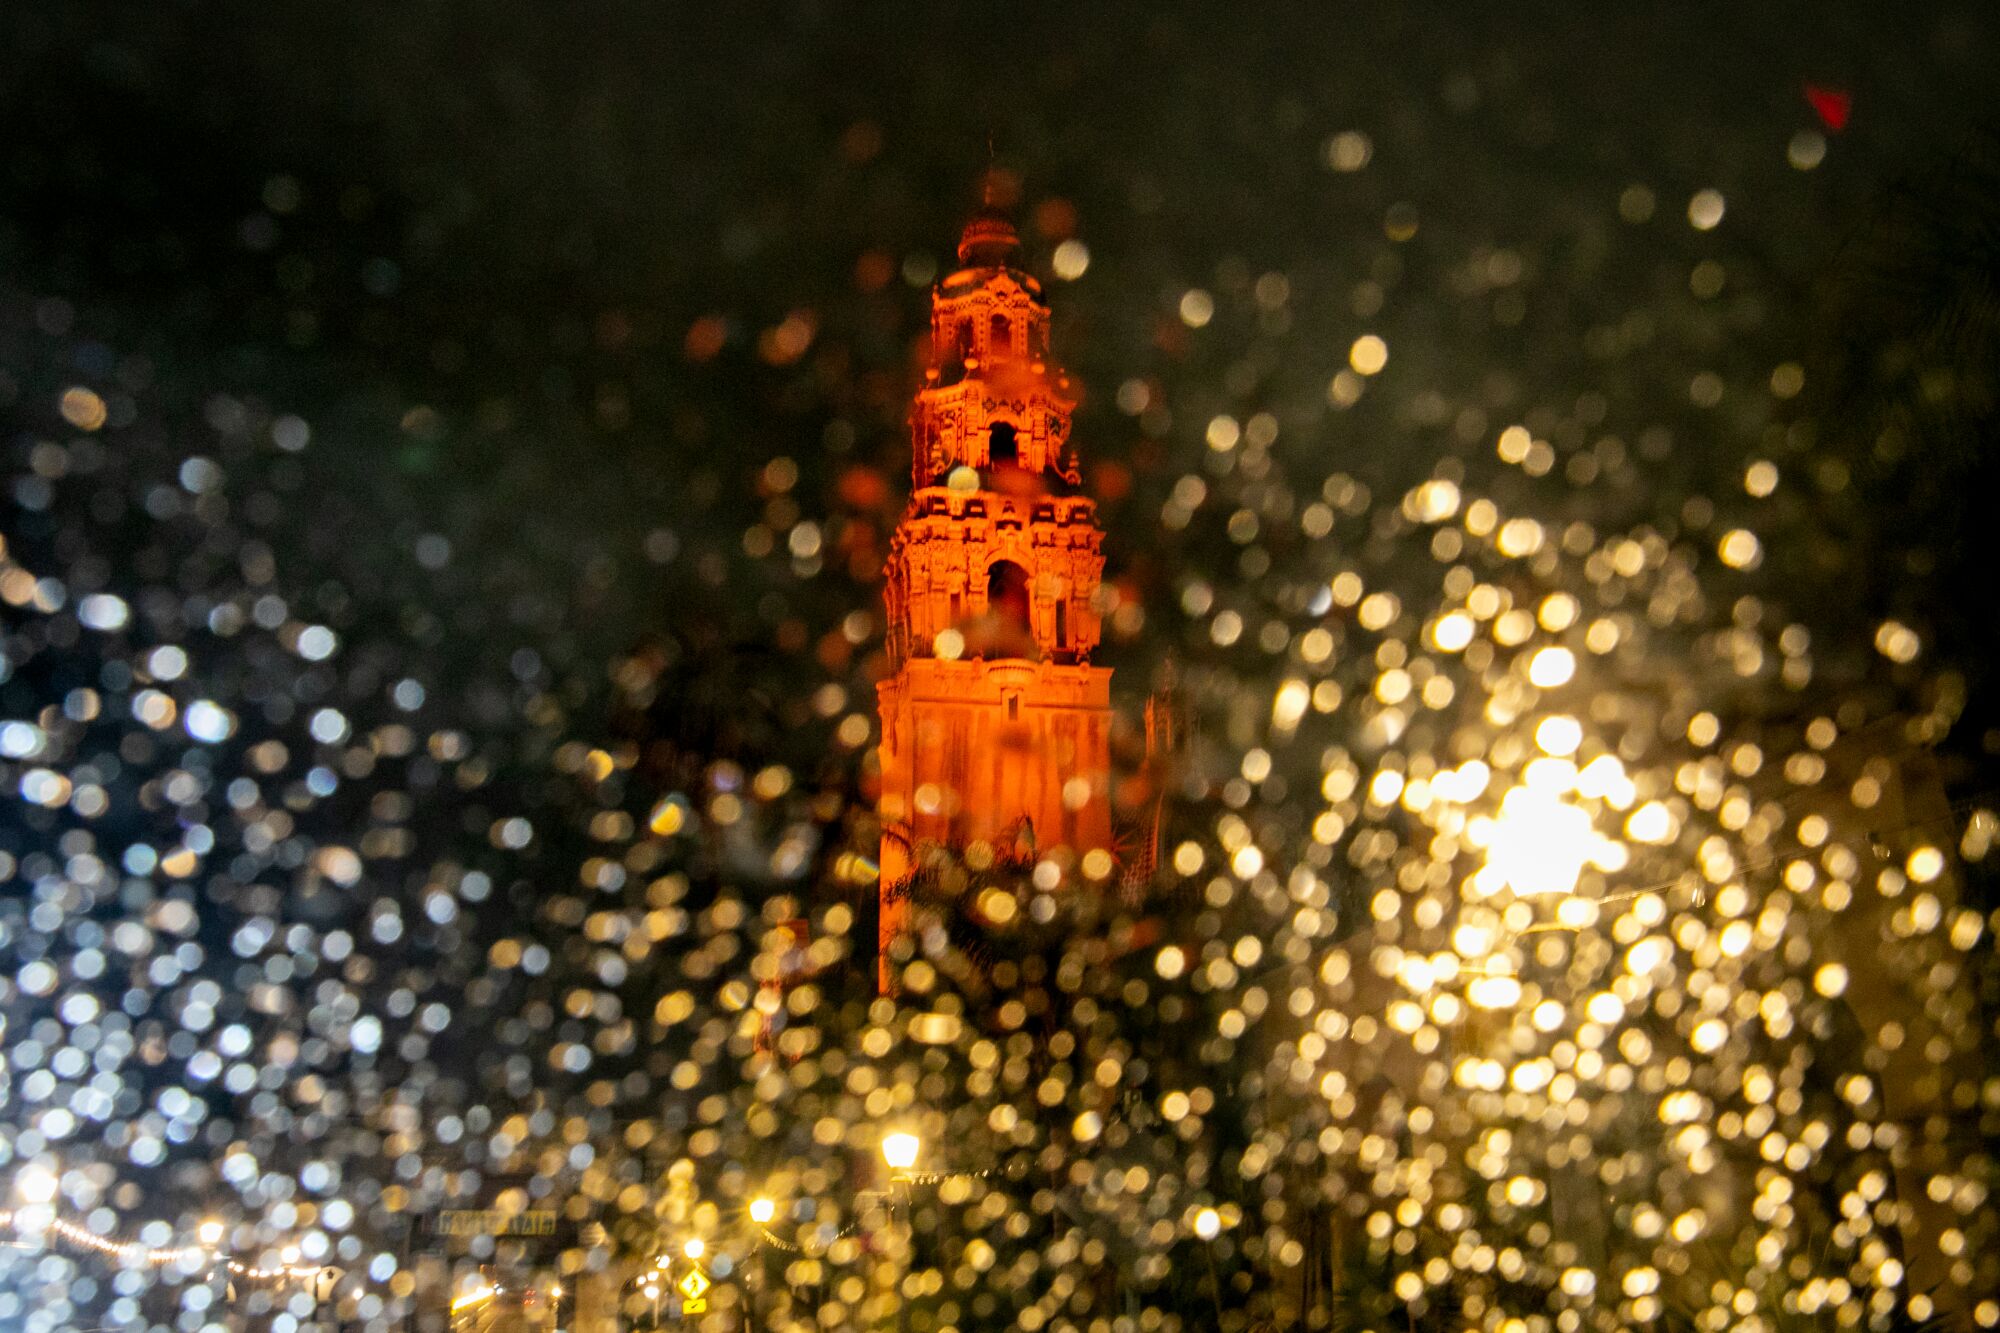 On the eve of President Joe Biden’s inauguration, the California Tower in Balboa Park is lit up